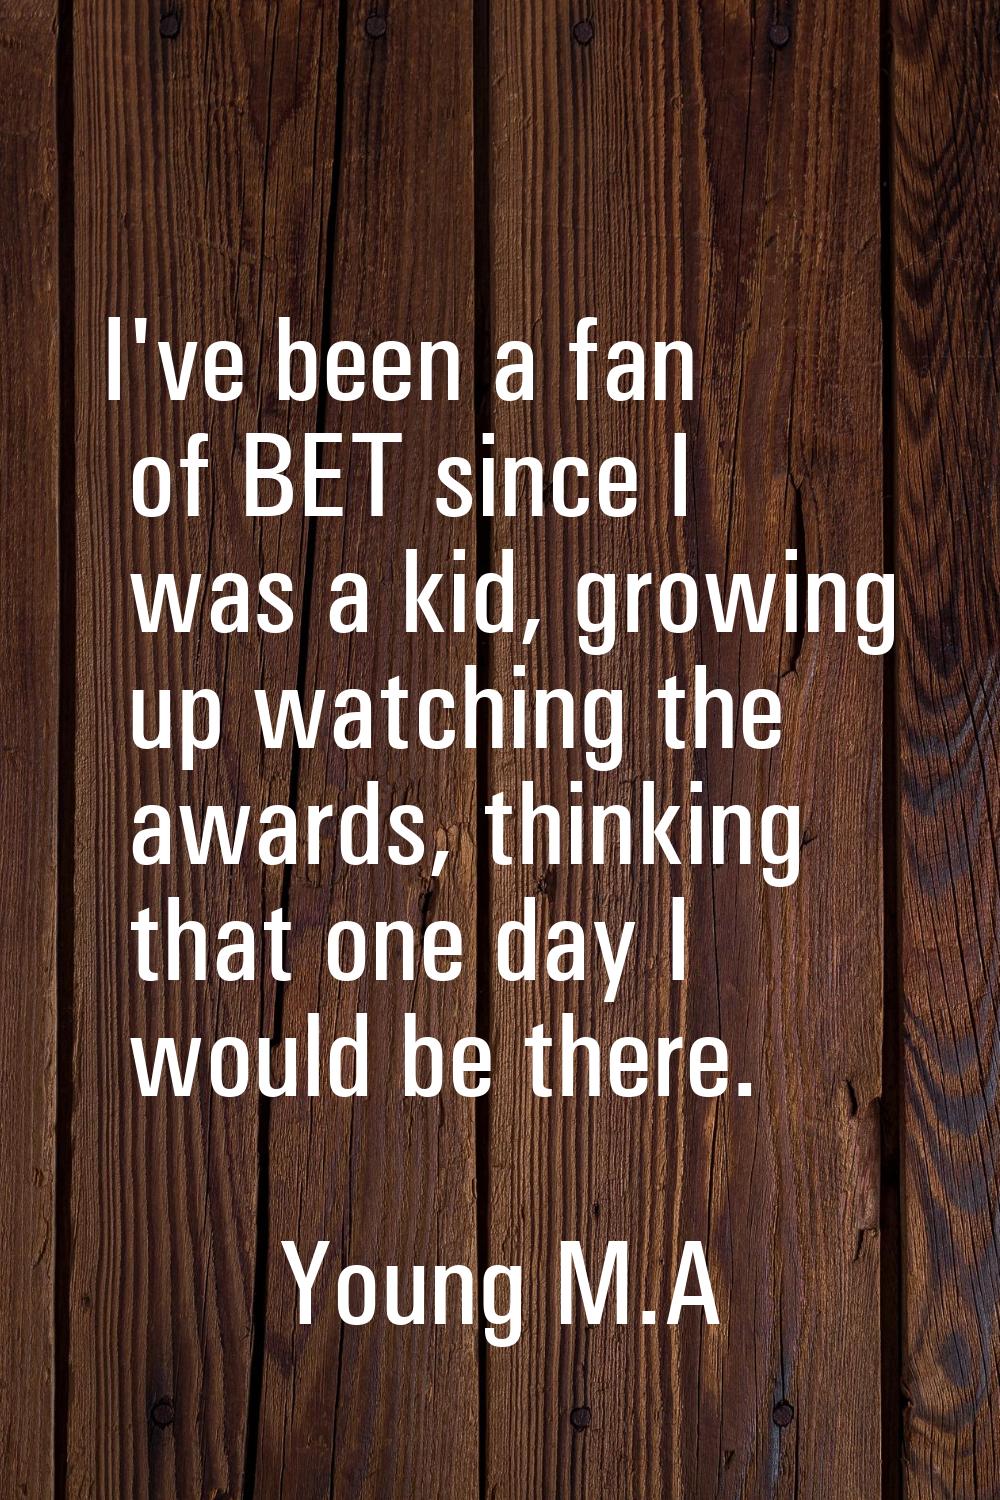 I've been a fan of BET since I was a kid, growing up watching the awards, thinking that one day I w